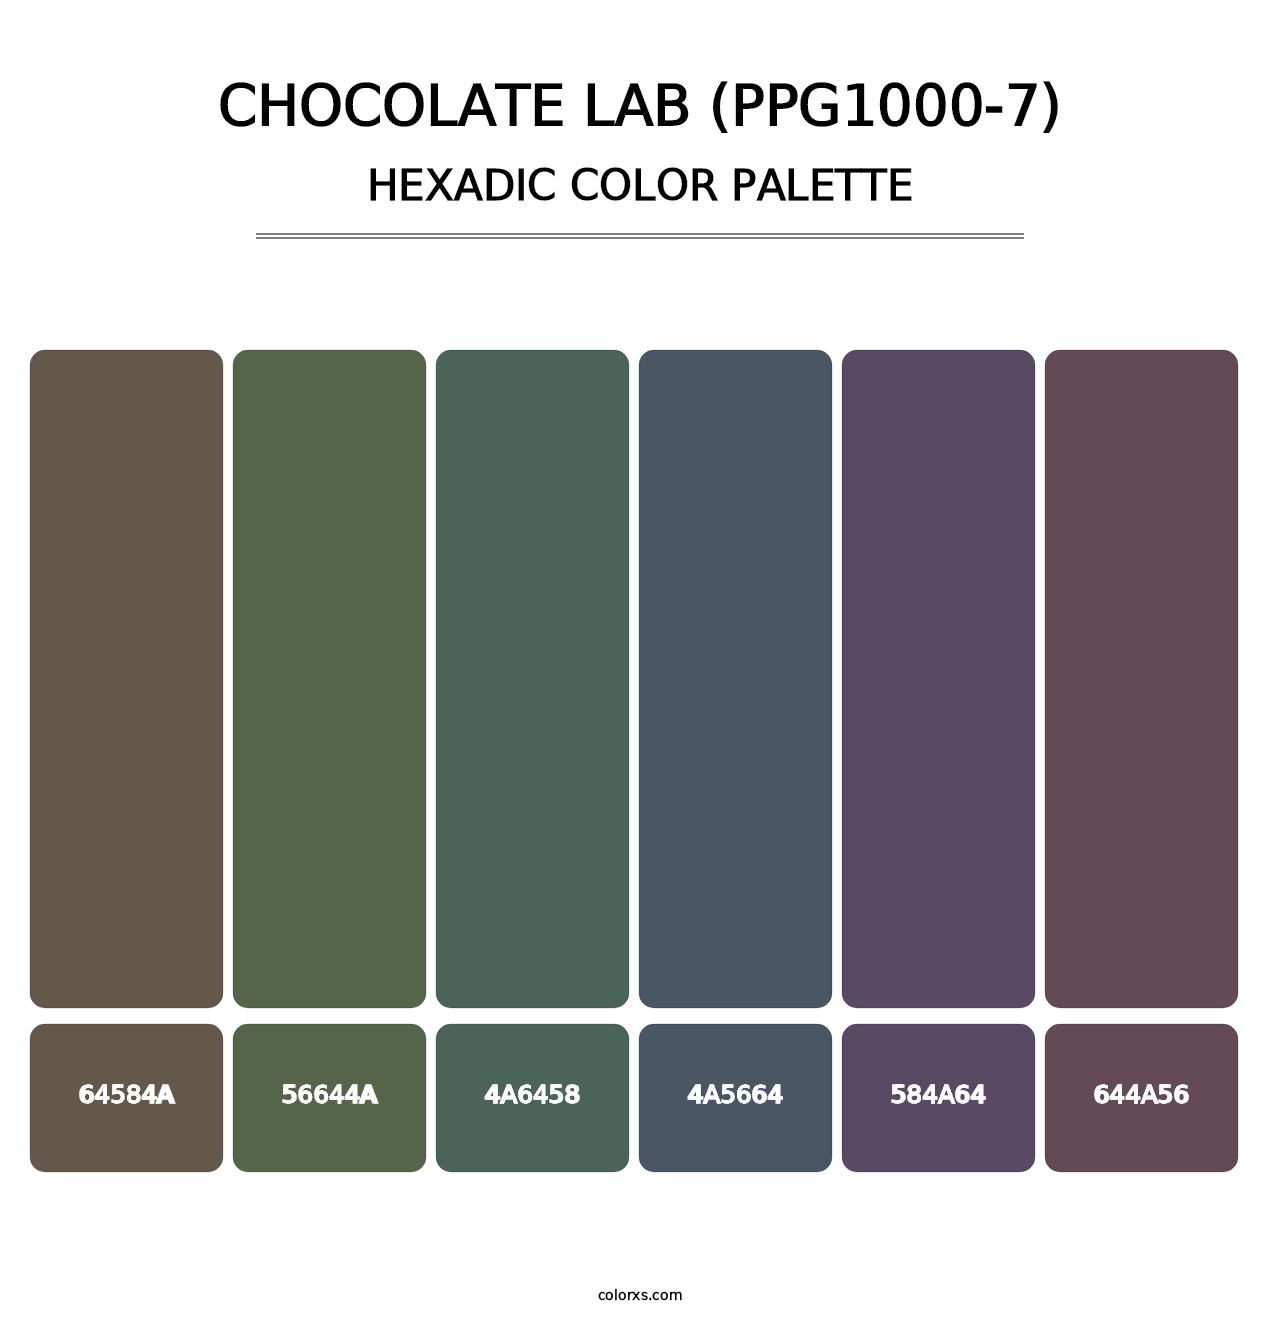 Chocolate Lab (PPG1000-7) - Hexadic Color Palette